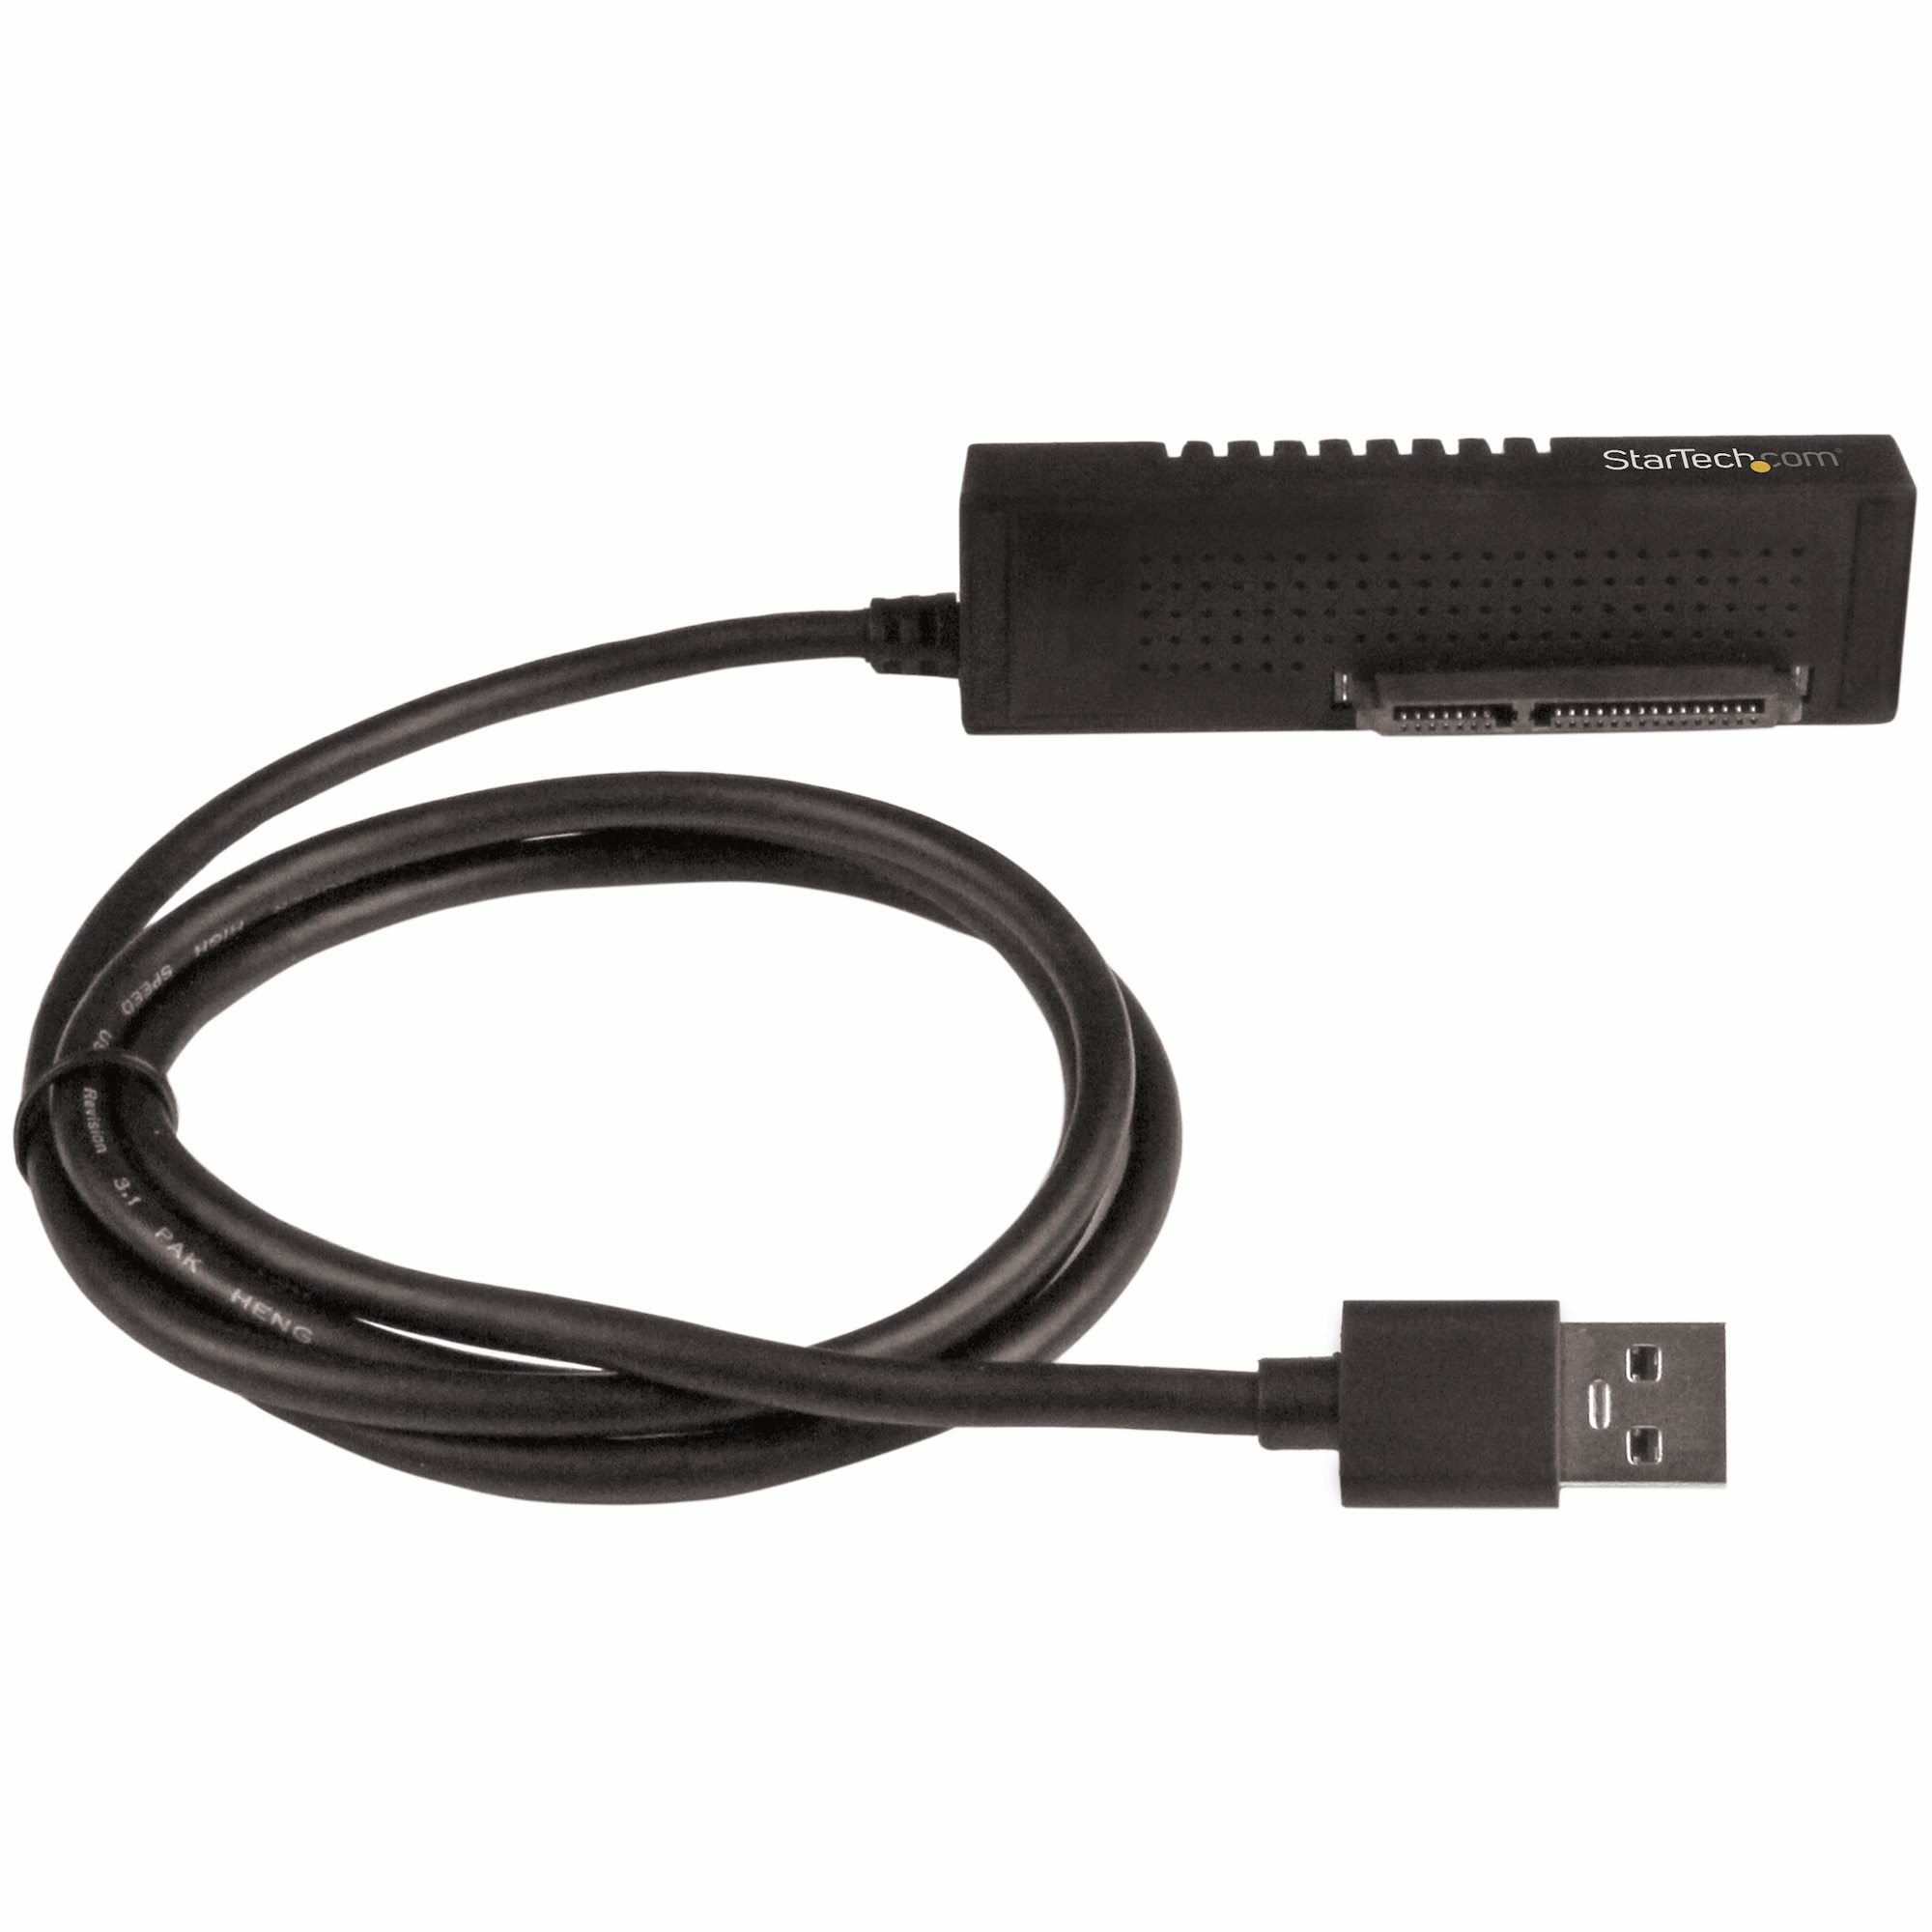 Cable SATA USB 3.1 - SATA 2.5 3.5 - Drive Adapters and Drive Converters | StarTech.com